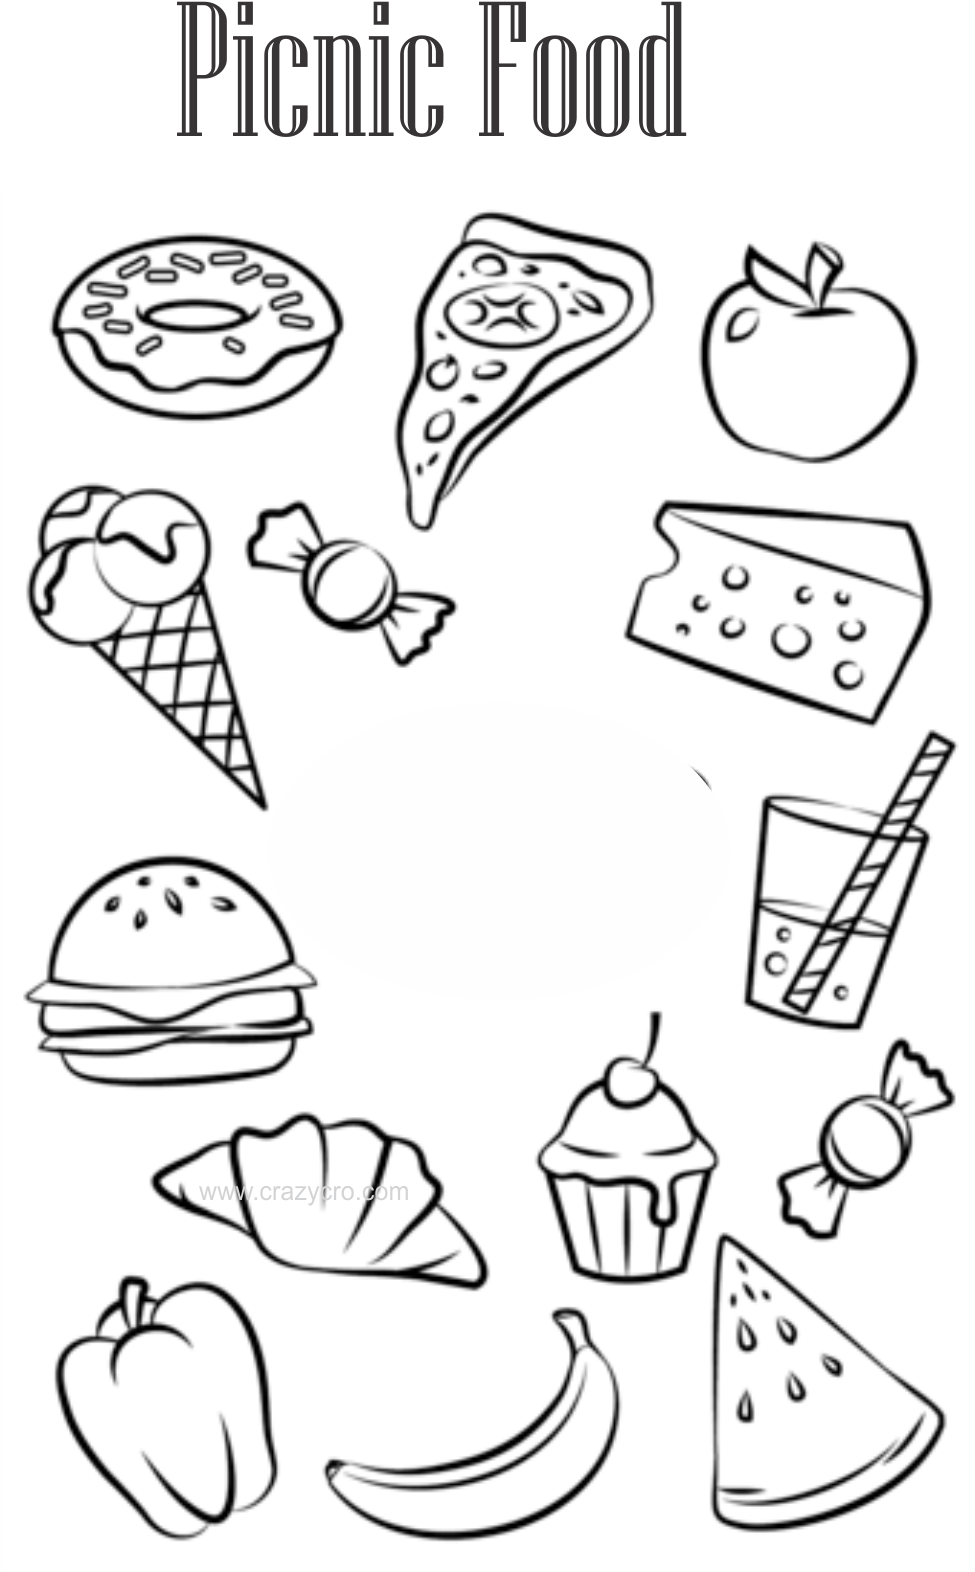 Picnic Food Coloring Pages Printable Colouring Pages Food Clipart Large Size Png Image Pikpng